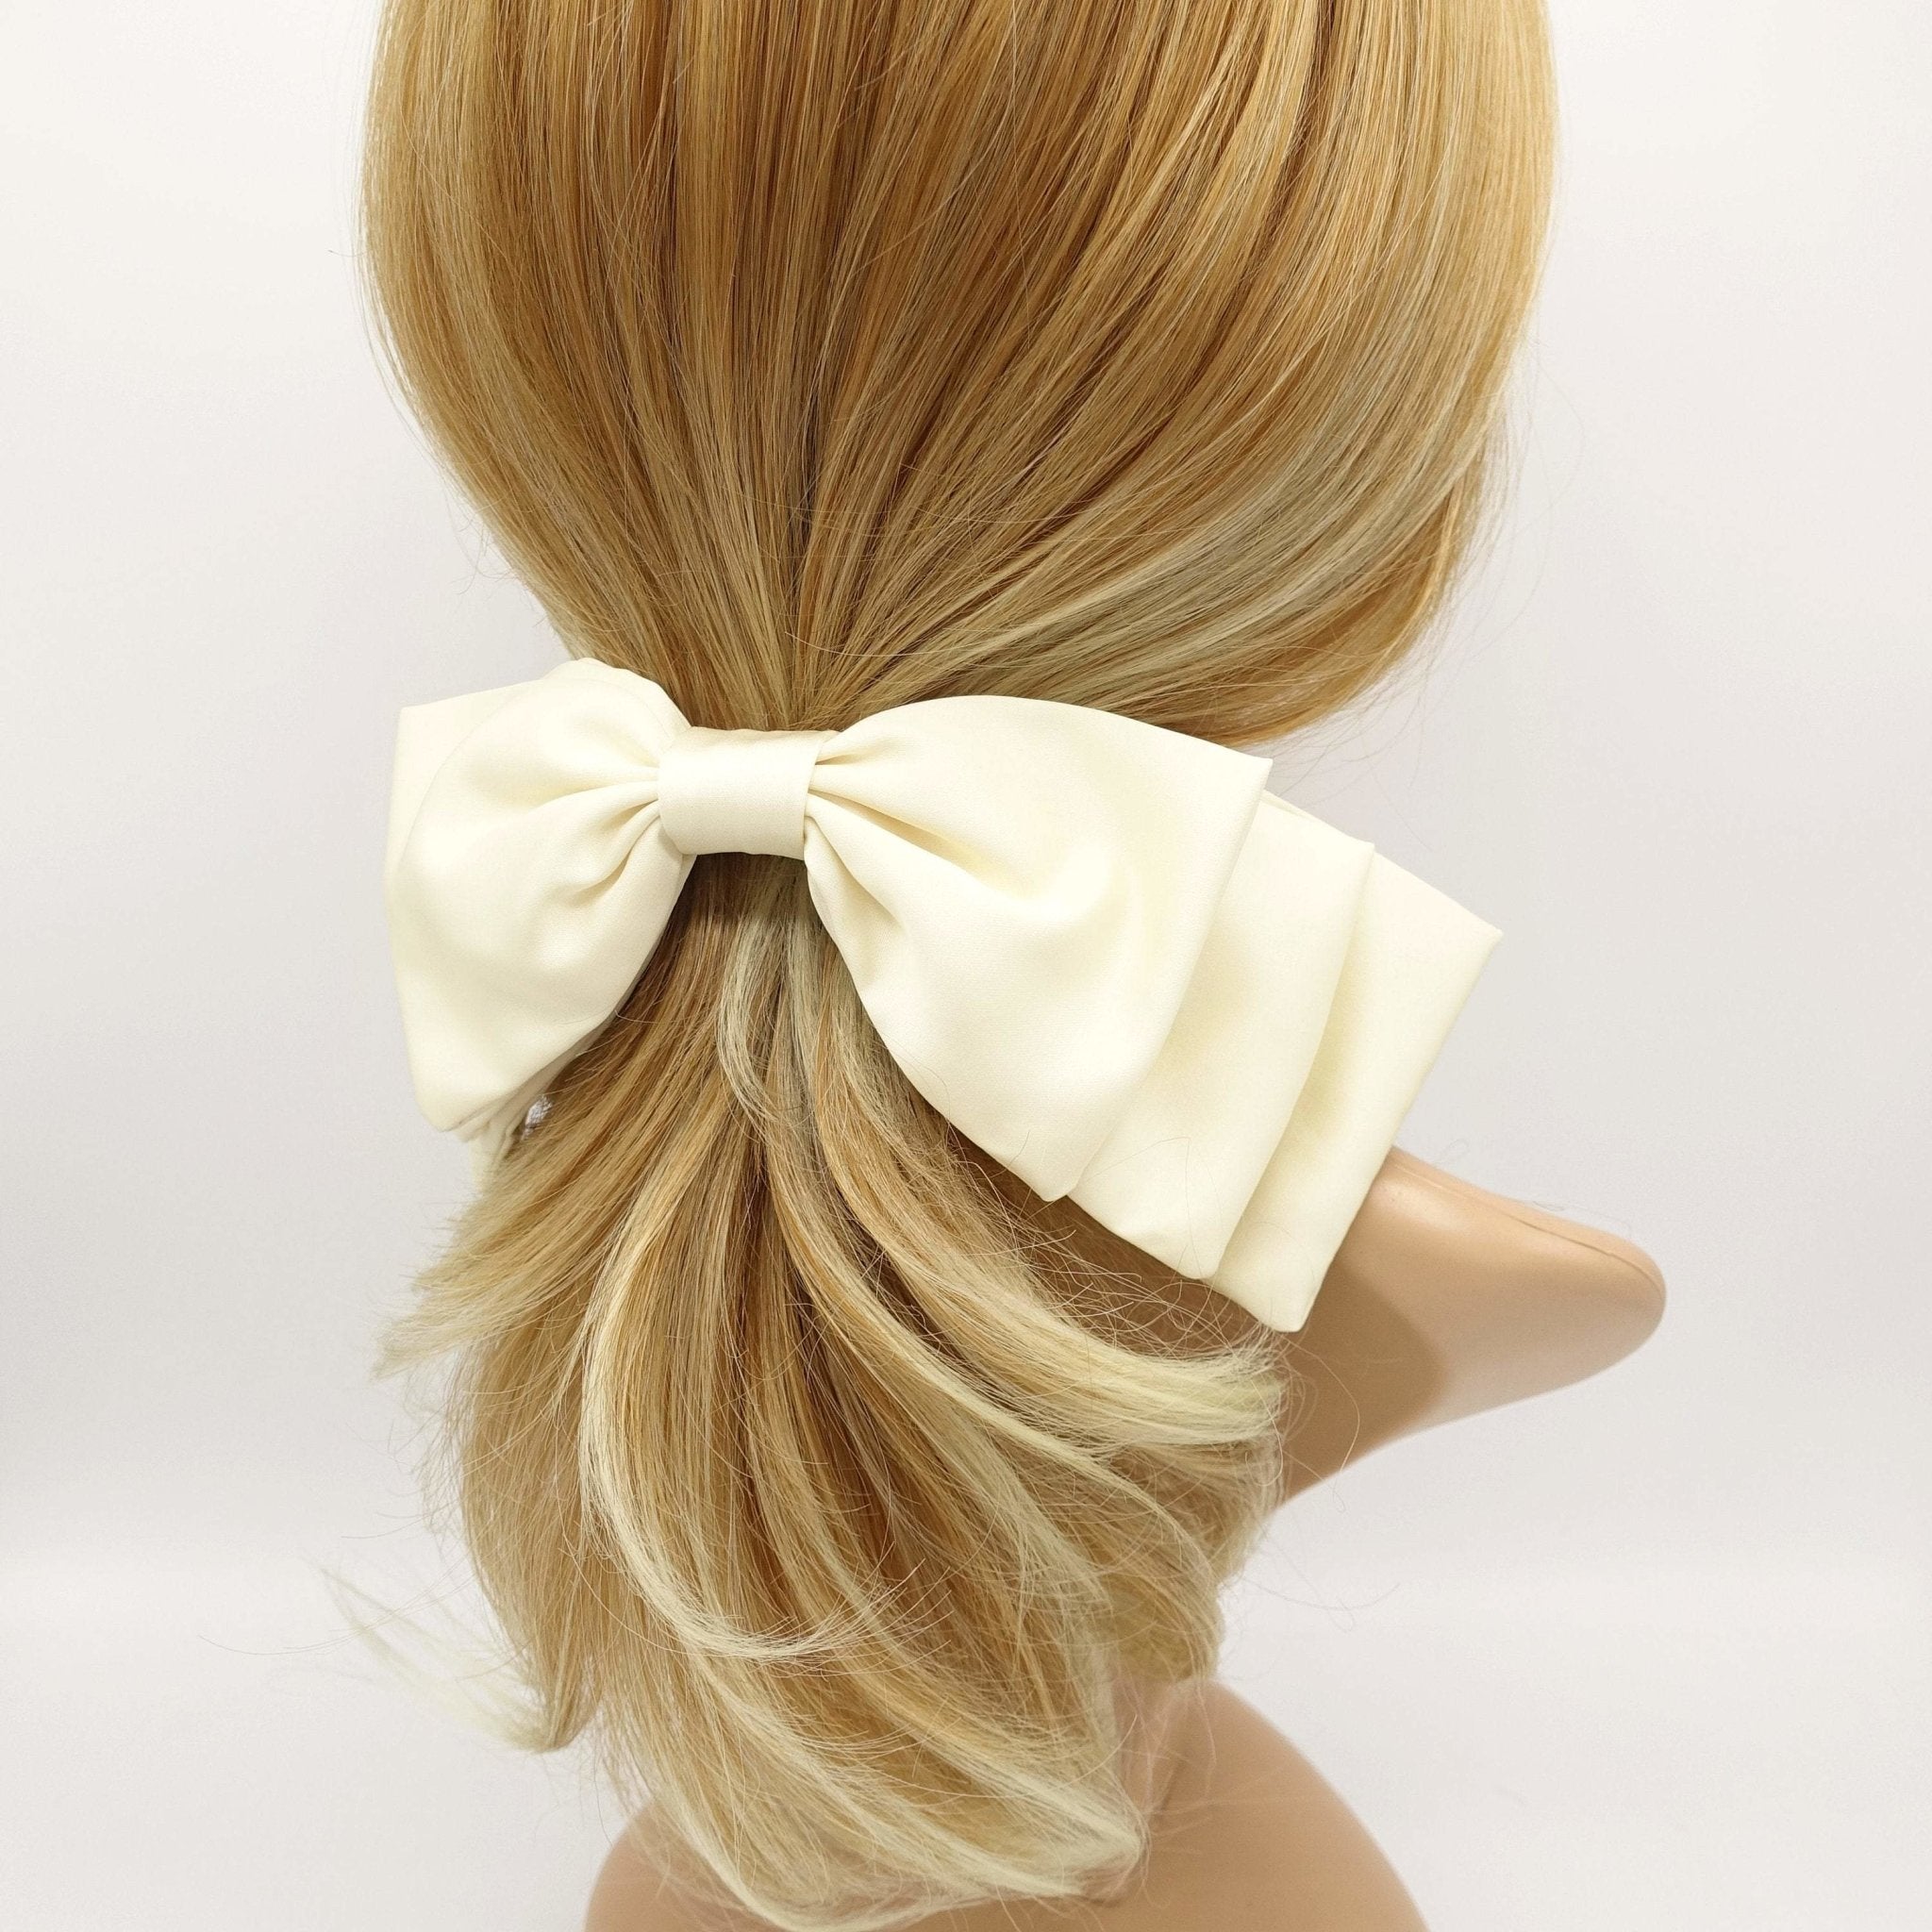 VeryShine claw/banana/barrette Cream white satin double stacked hair bow for women